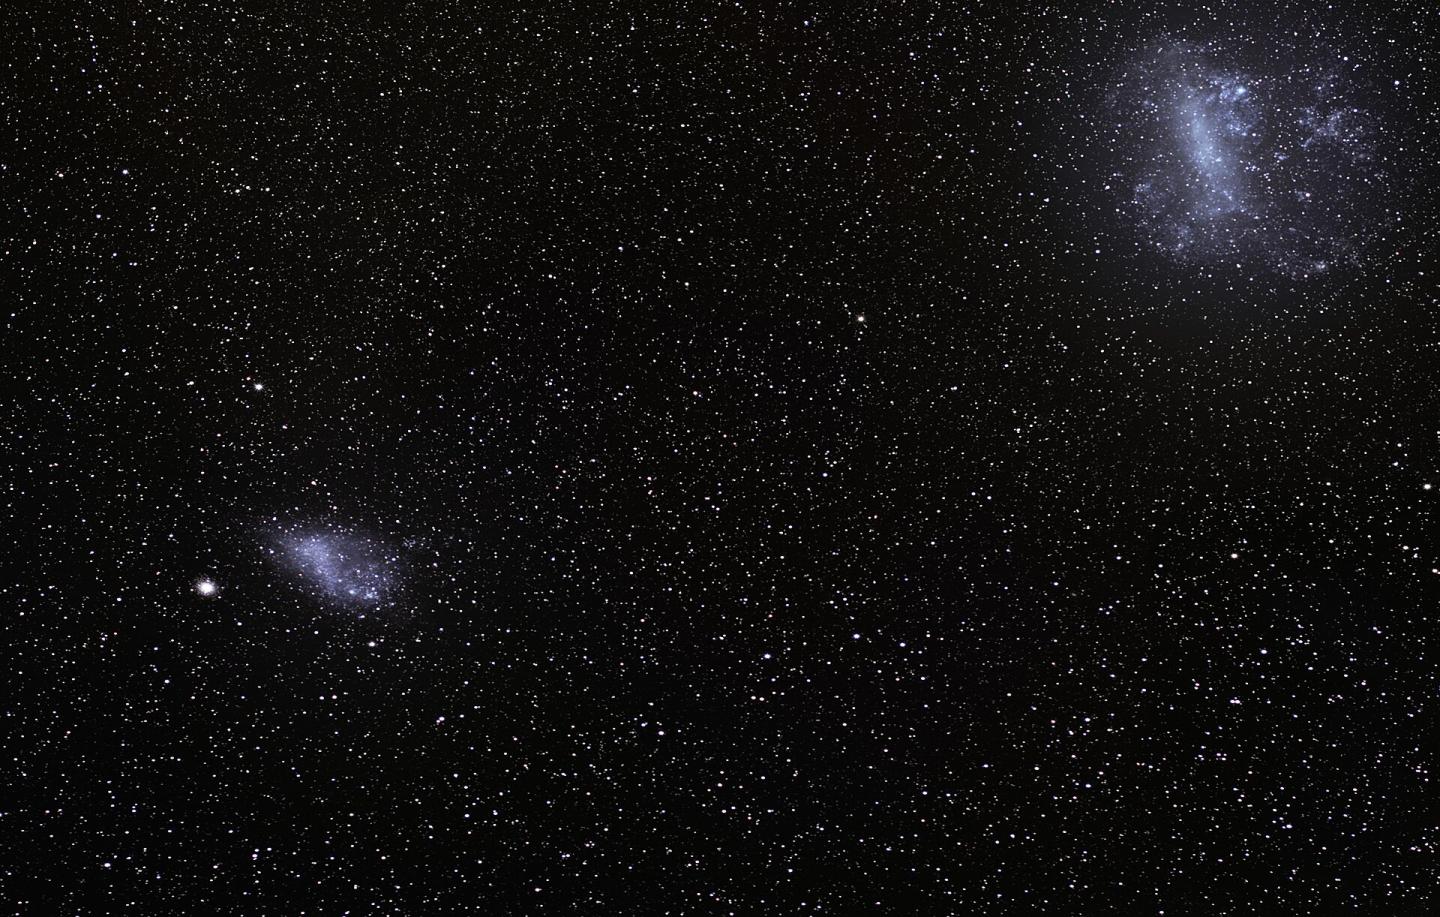 A photograph of the Small and Large Magellanic Clouds